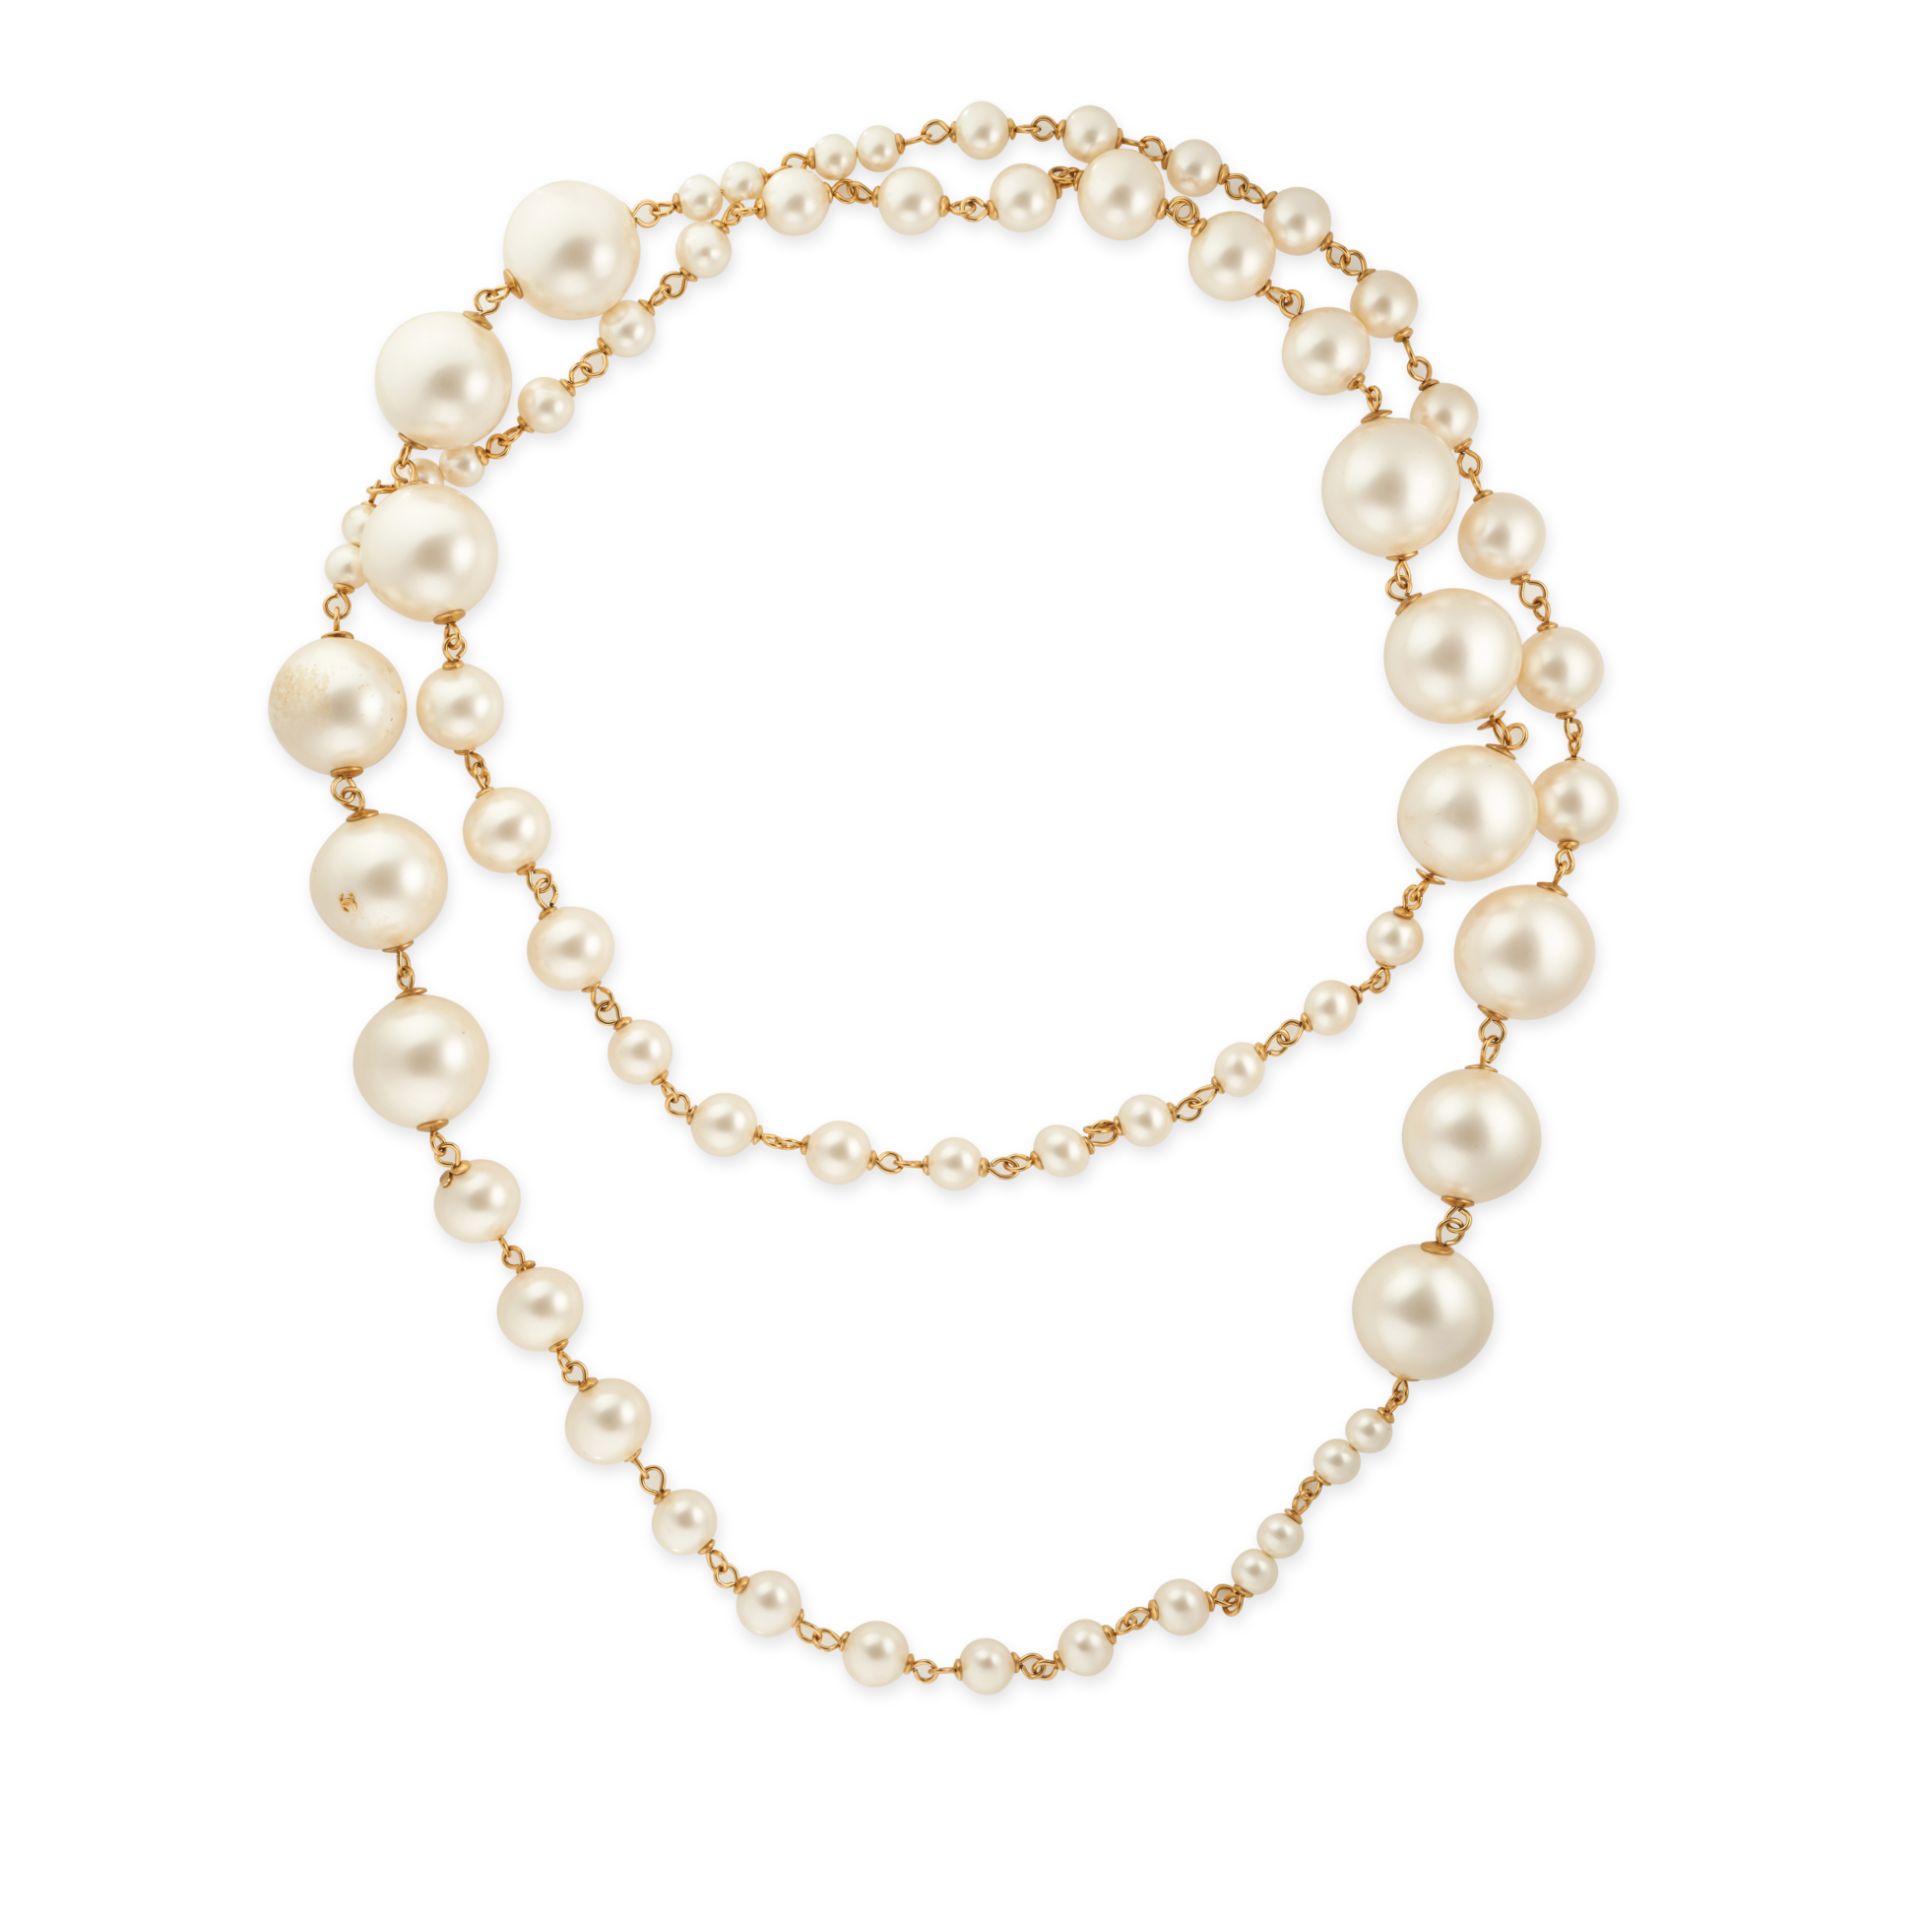 CHANEL, A LONG FAUX PEARL NECKLACE comprising a single row of faux pearls alternating in size, at...